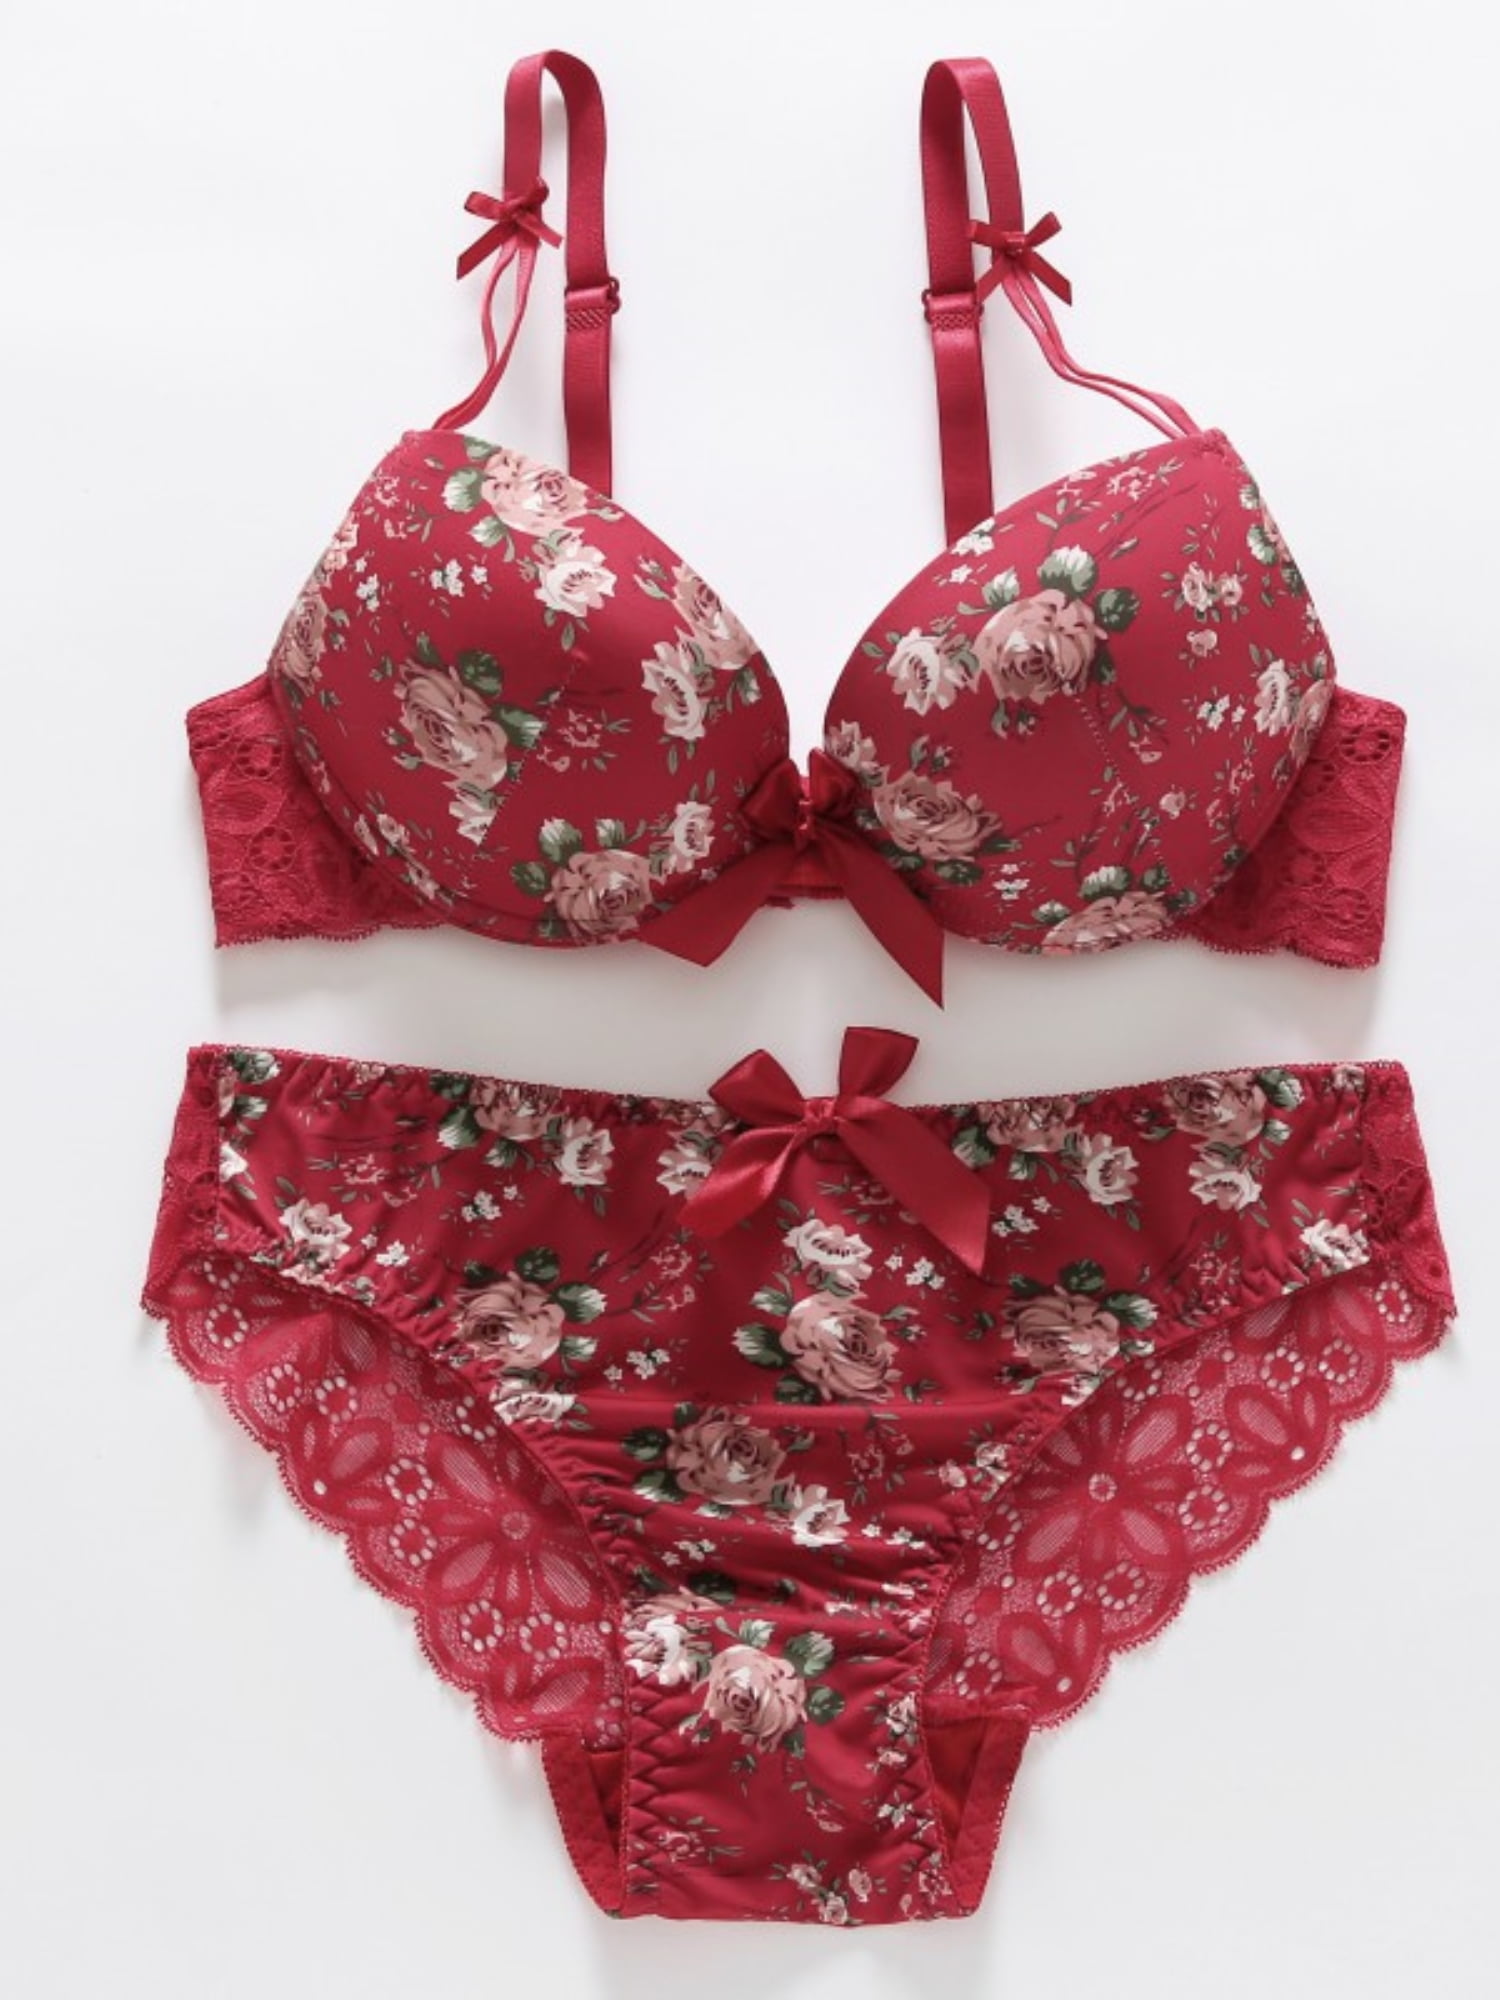 Like Me Affair Cotton Chicken Embroidery Bra for Women - Red - B08